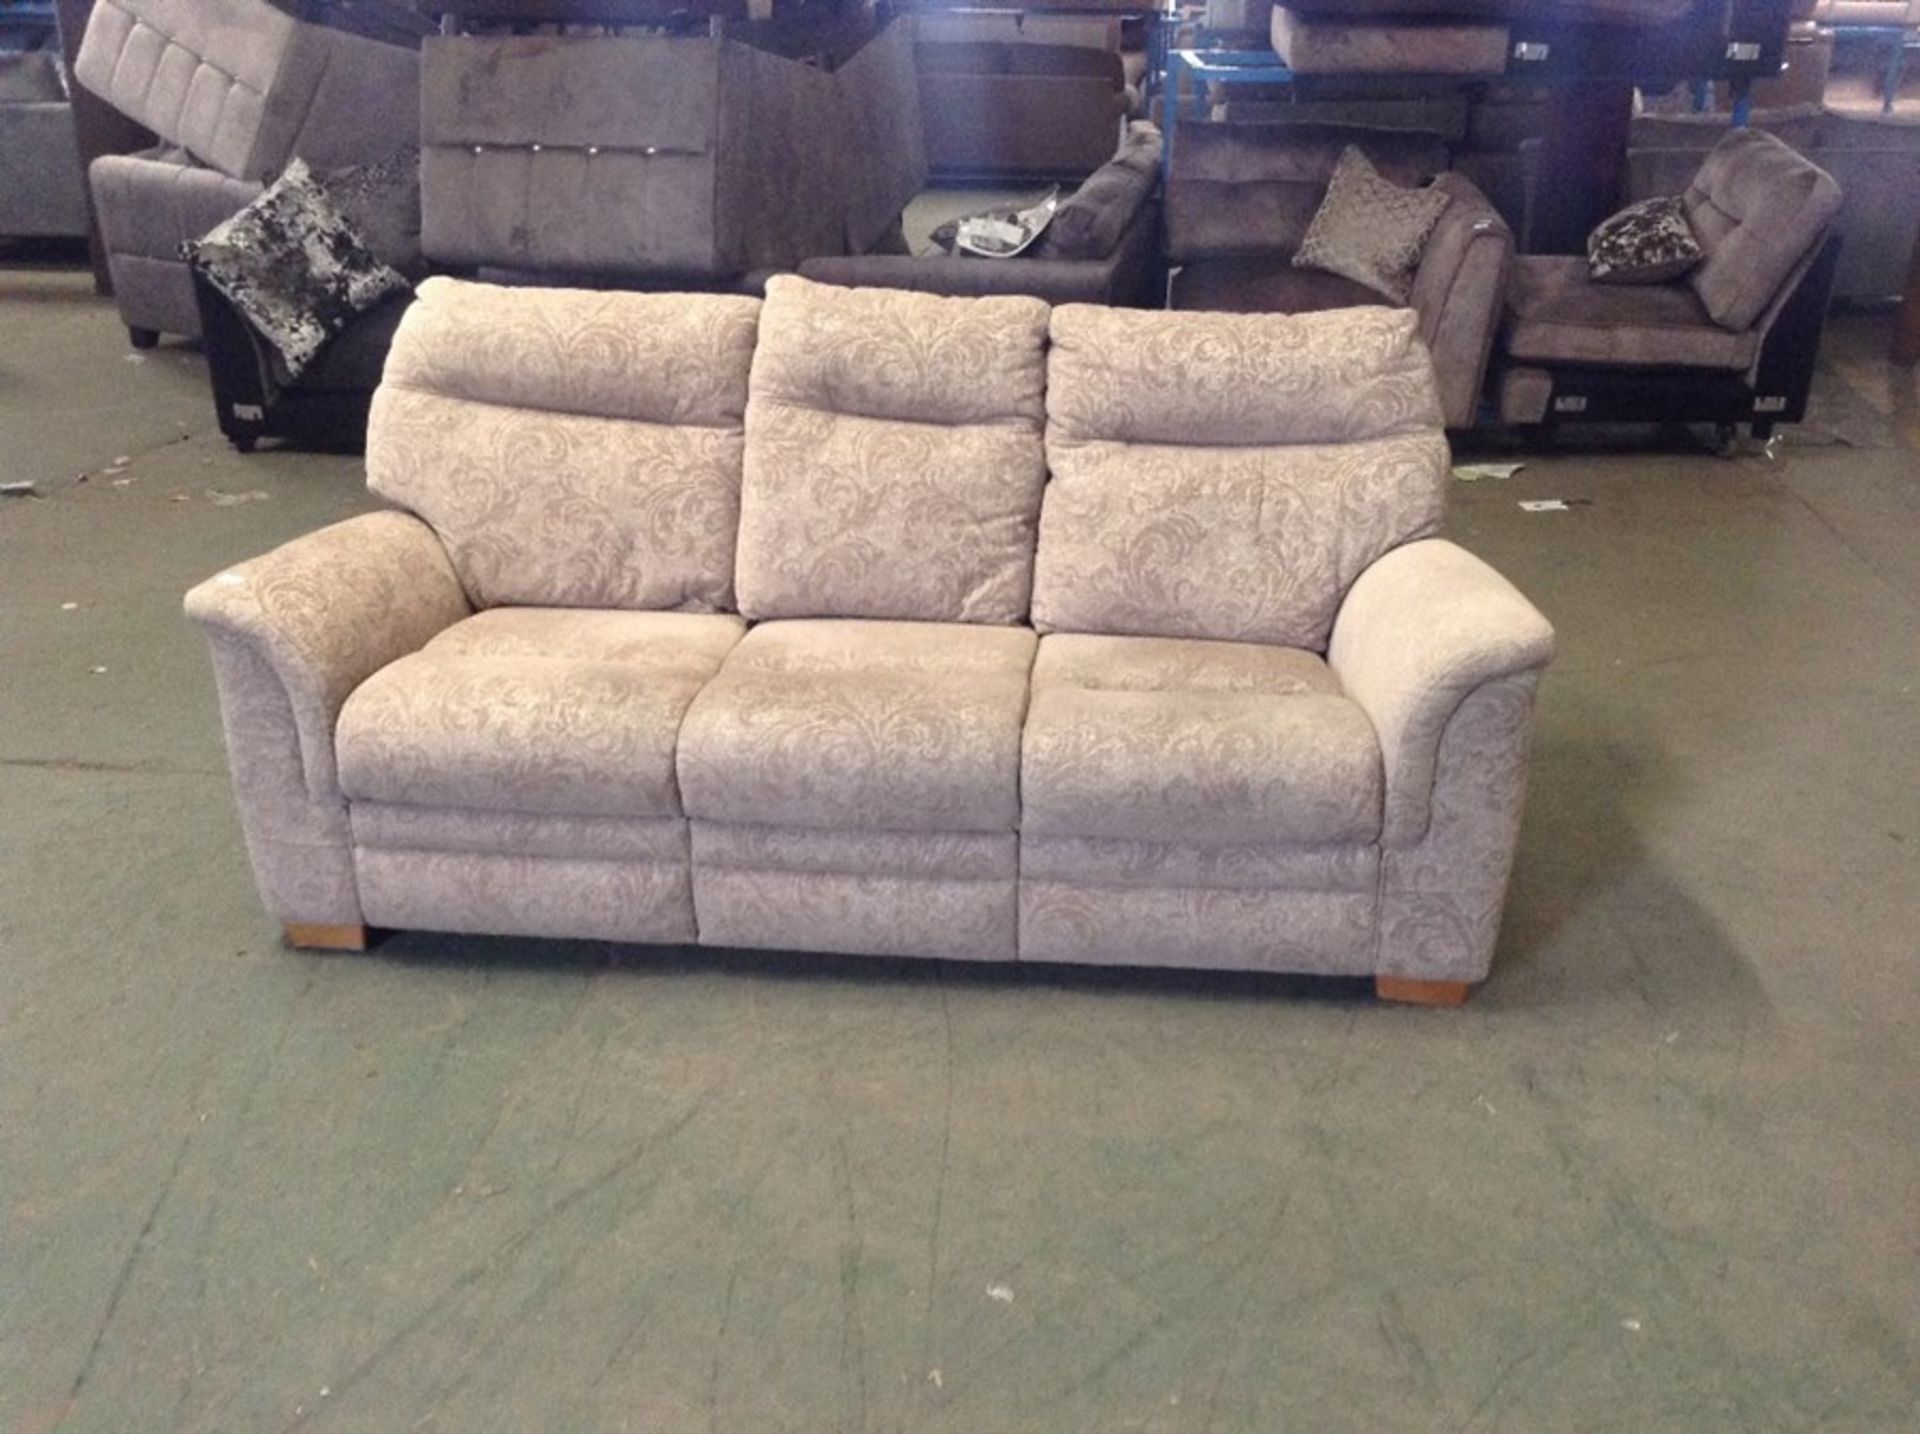 BEIGE PATTERNED HIGH BACK 3 SEATER TR002149 W00618